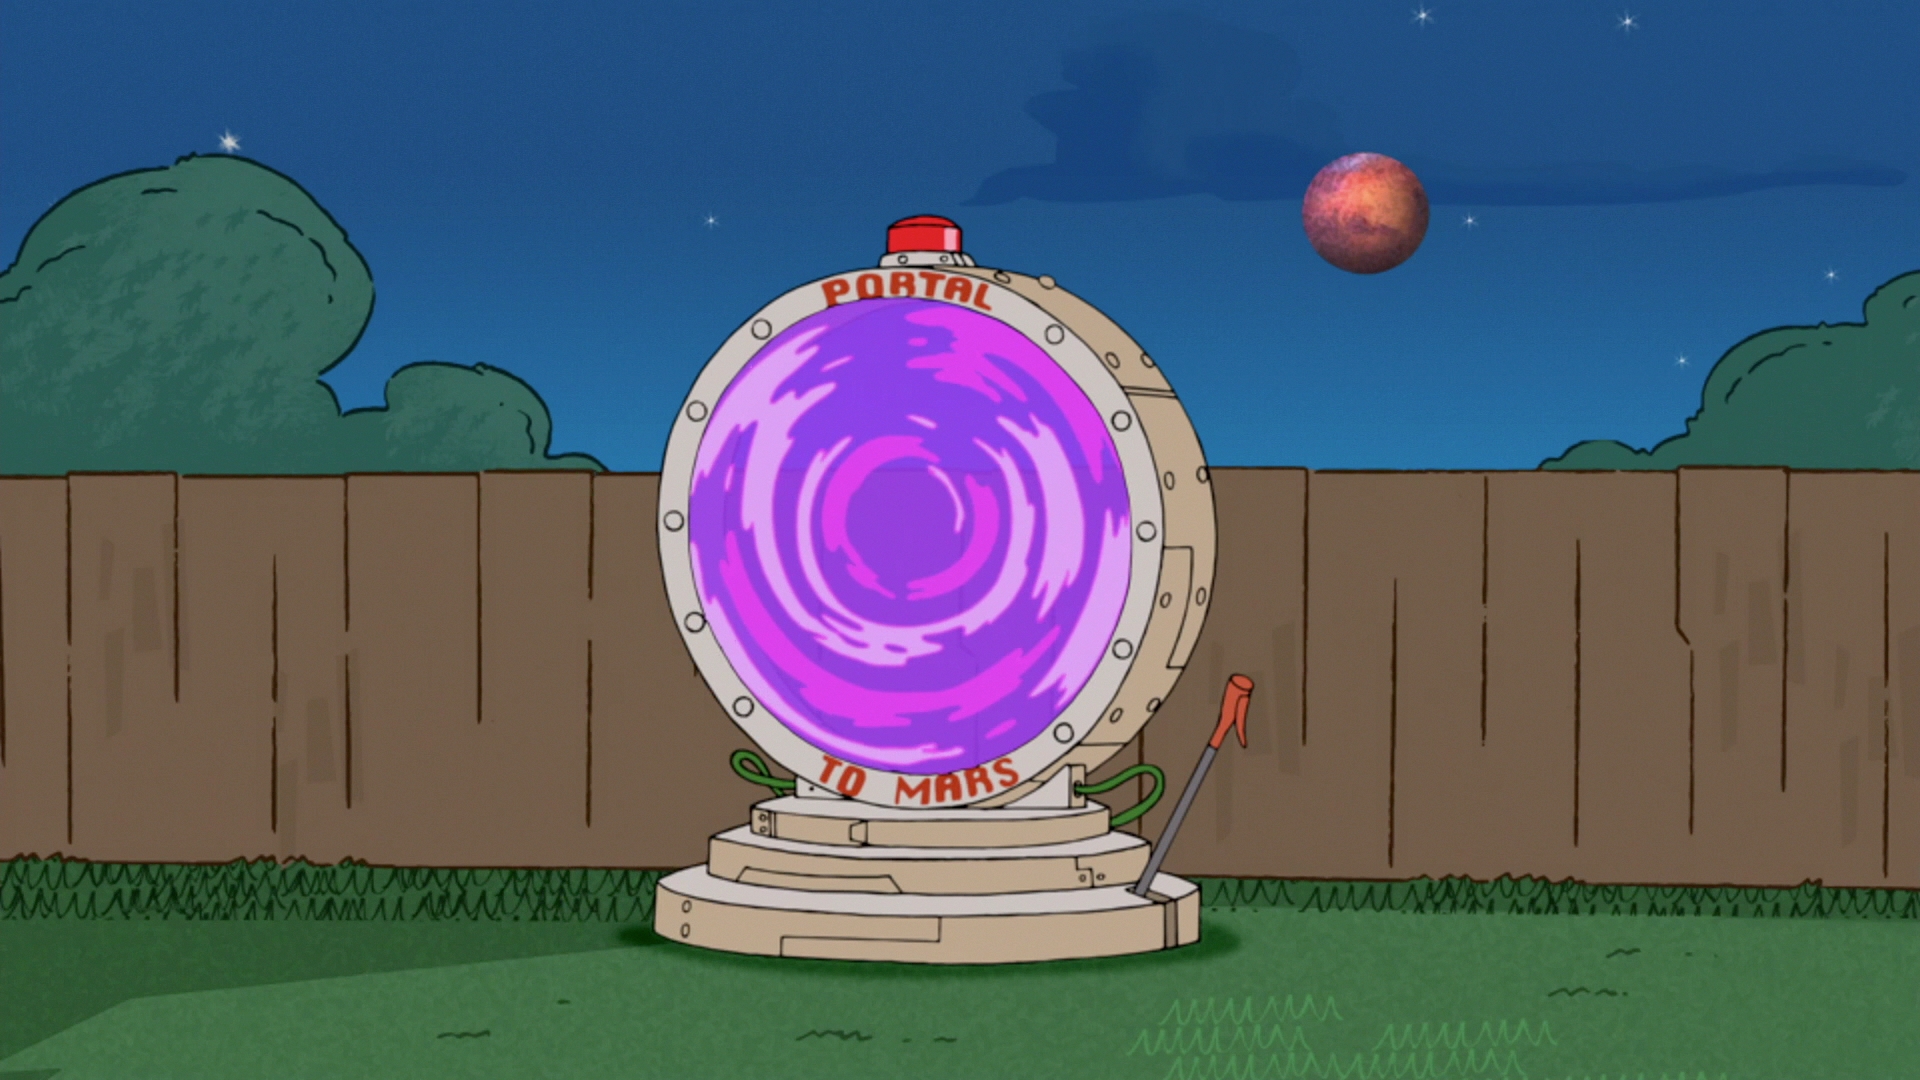 What is the title of this picture ? Image - Constructing a Portal to Mars.jpg | Phineas and Ferb Wiki